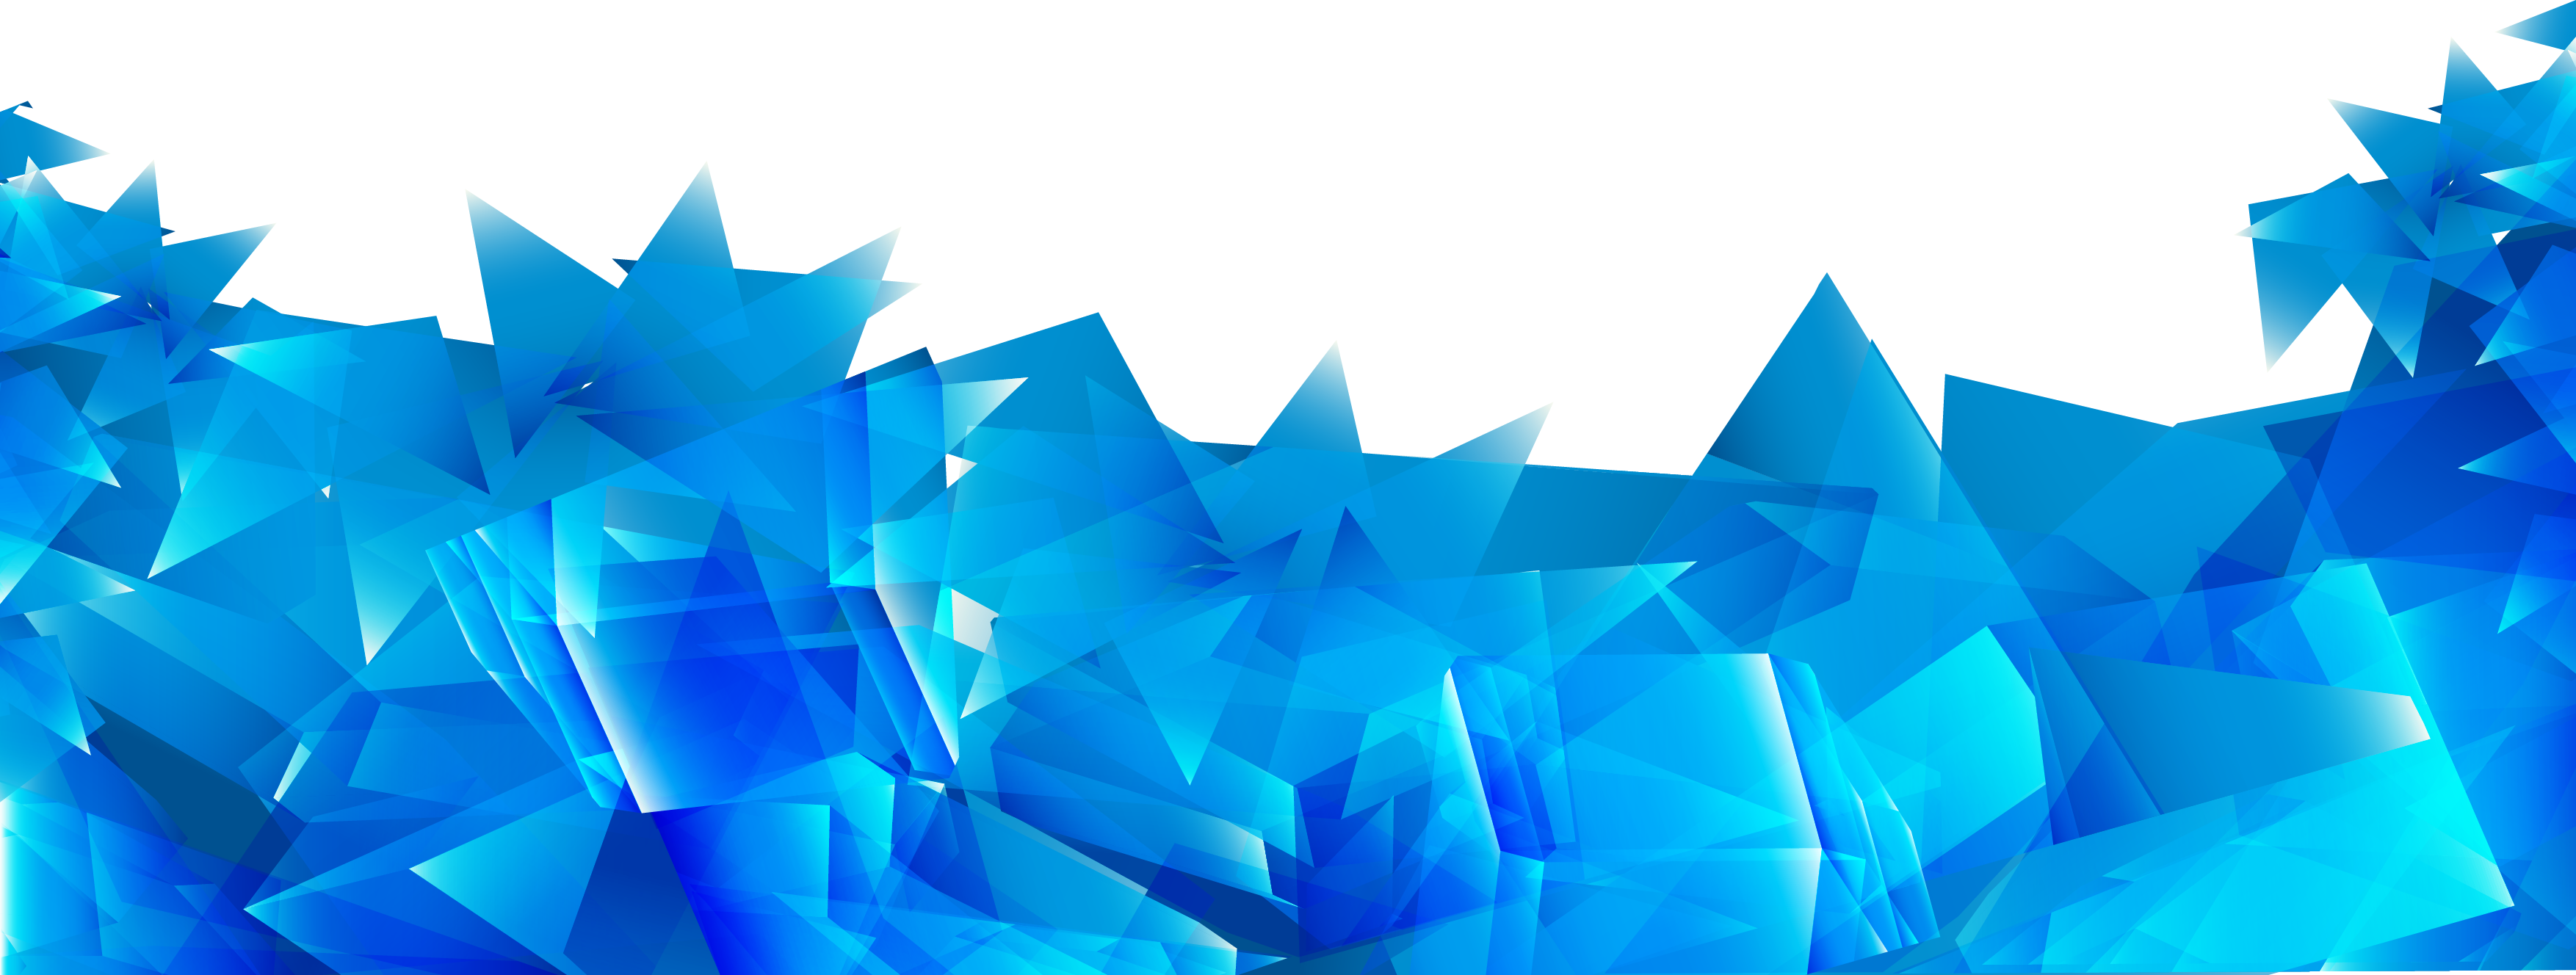 Blue abstract liquid shapes on transparent background PNG